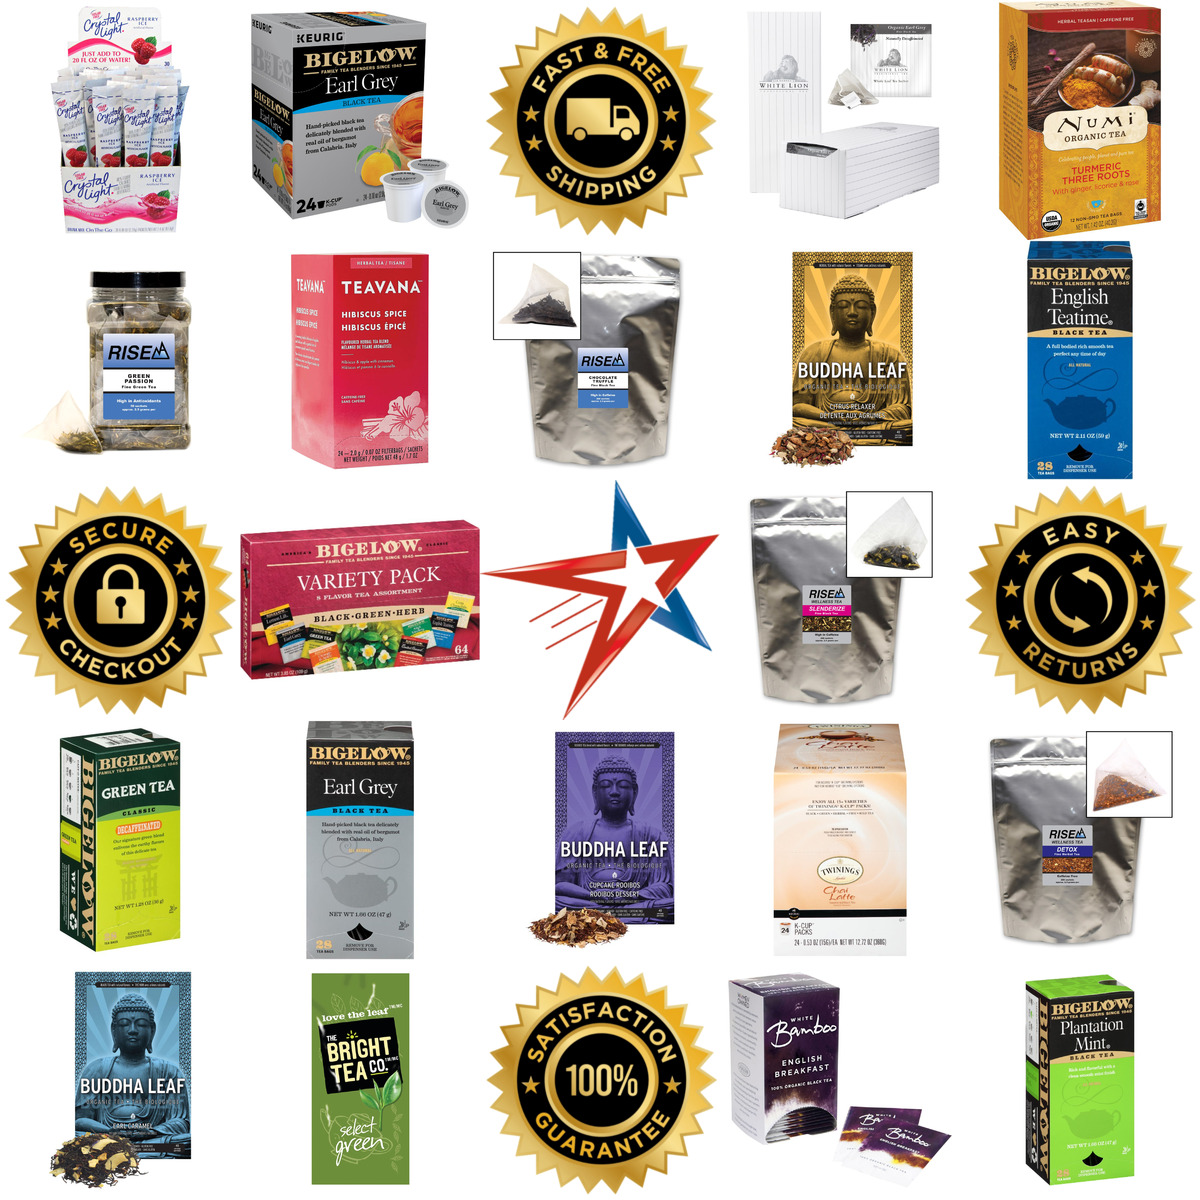 A selection of Tea products on GoVets